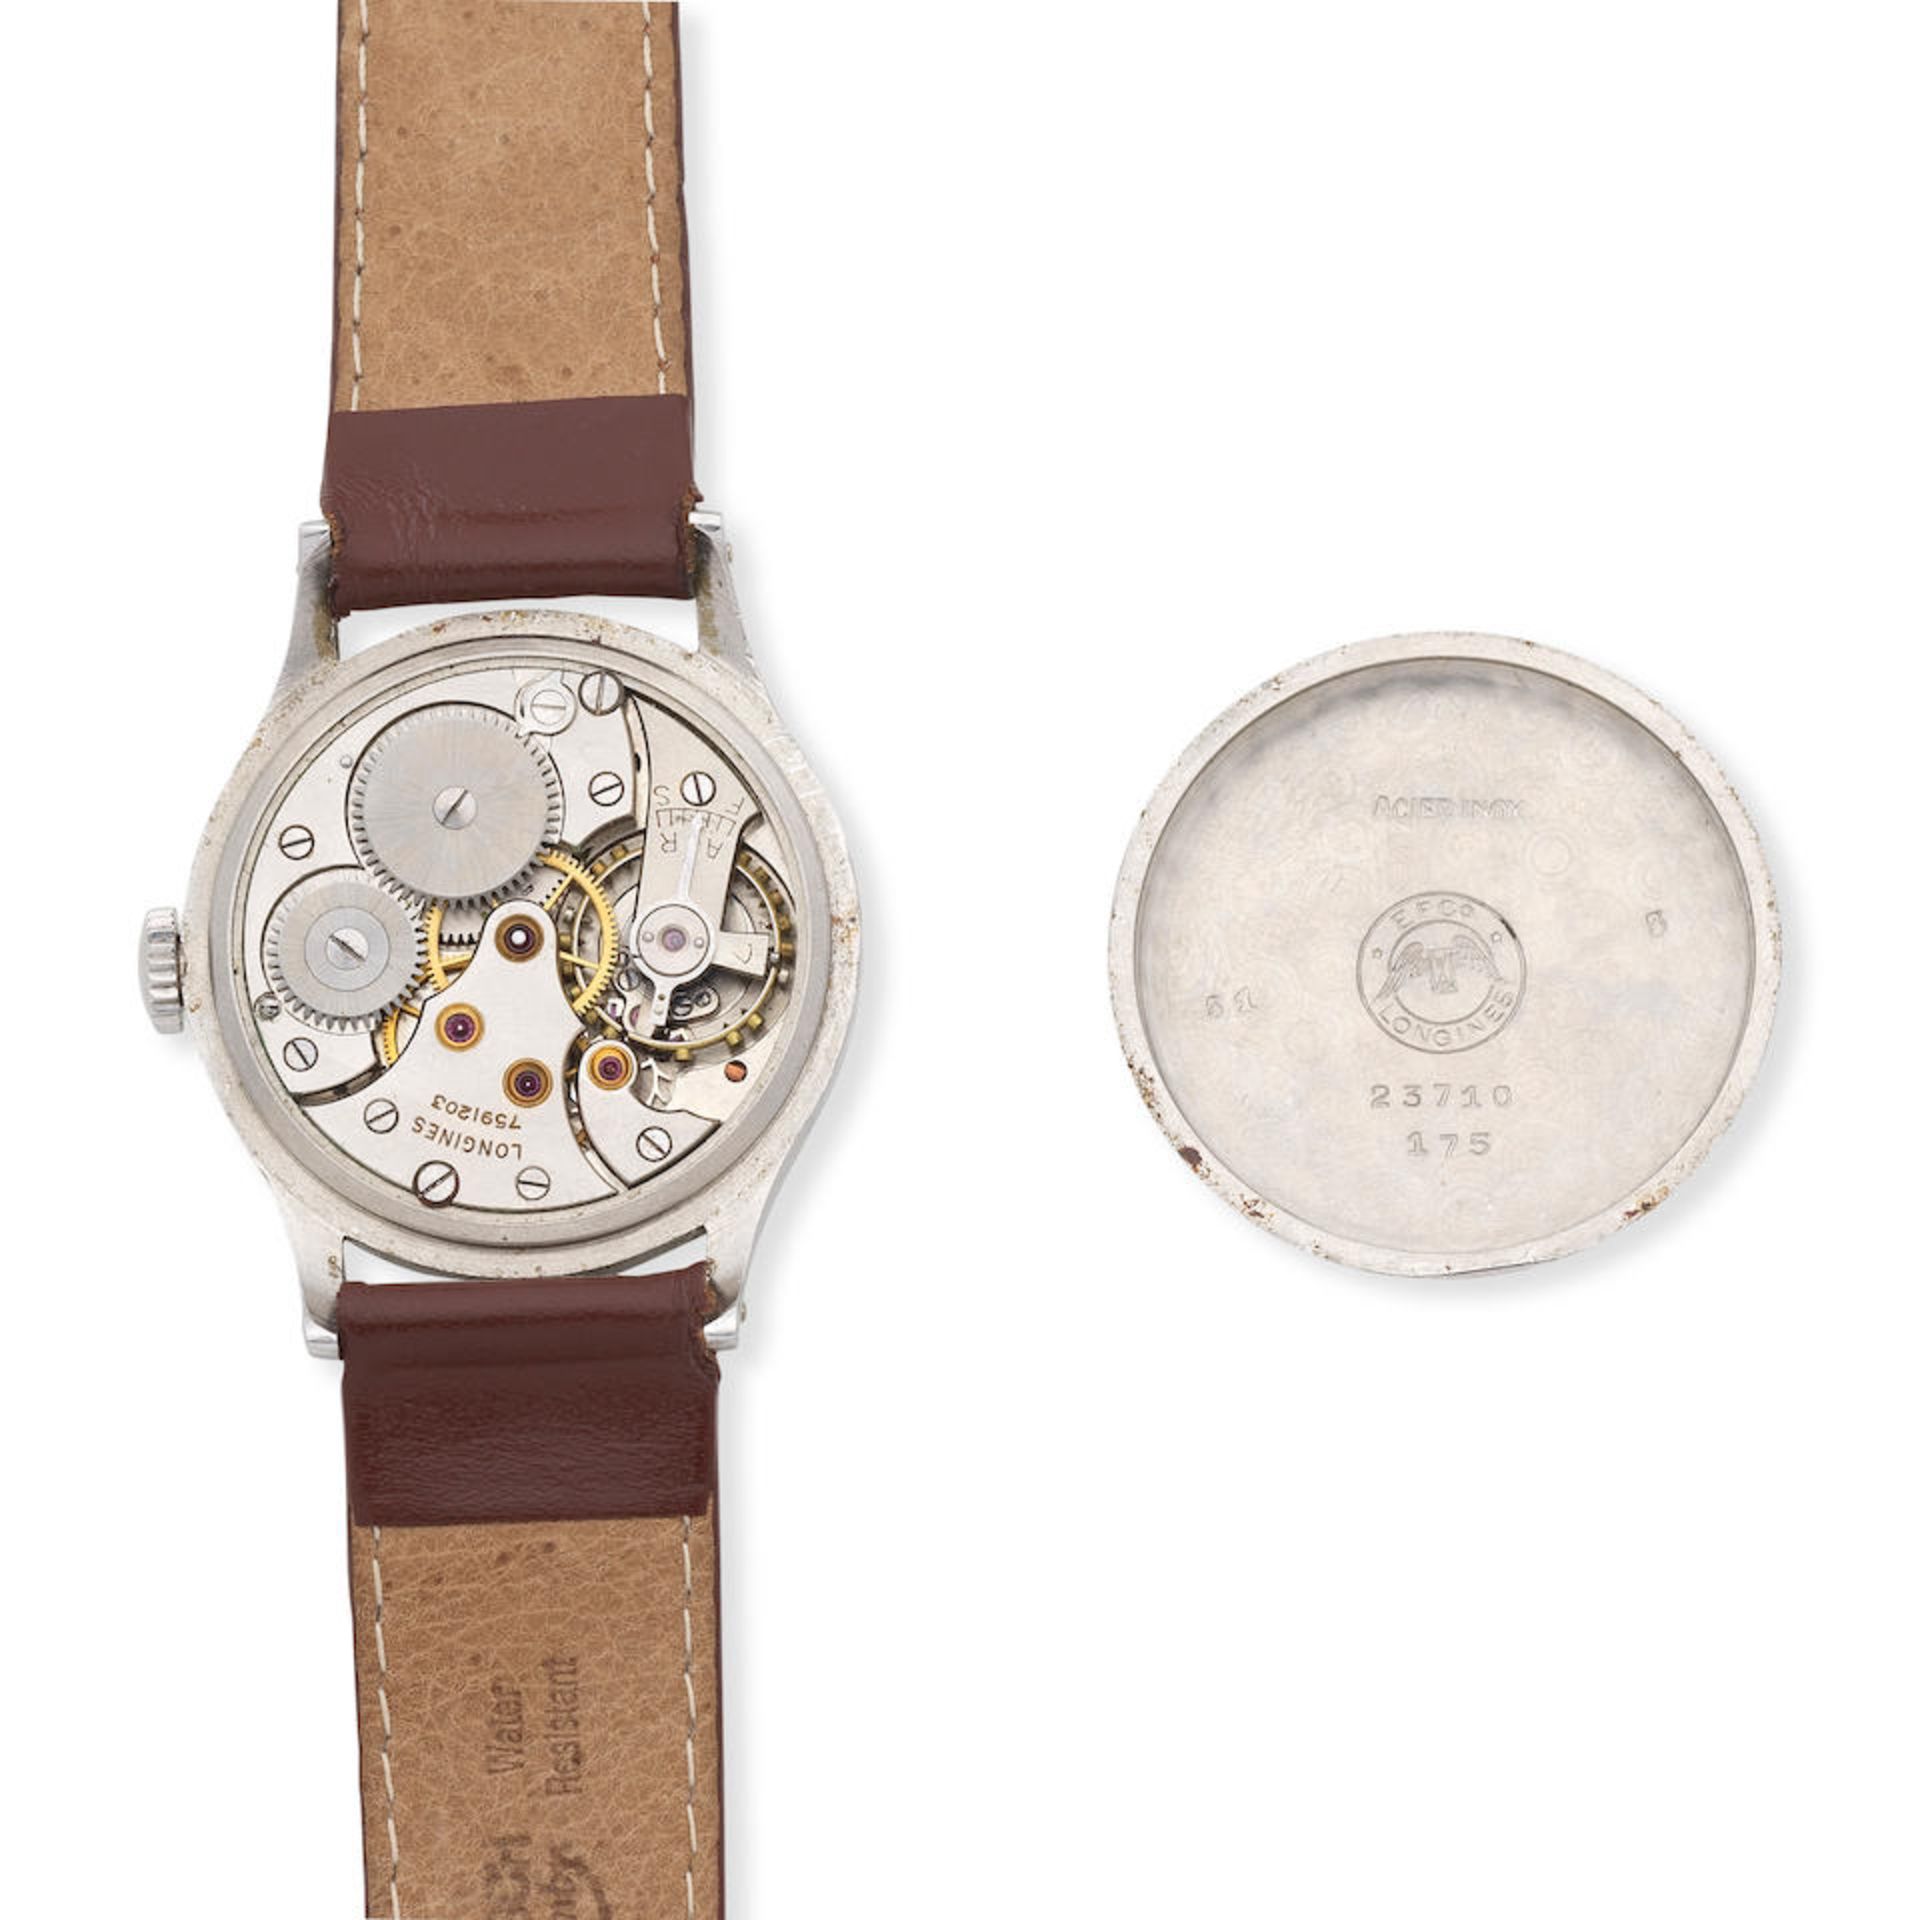 Longines. A stainless steel manual wind wristwatch Circa 1948 - Image 5 of 6